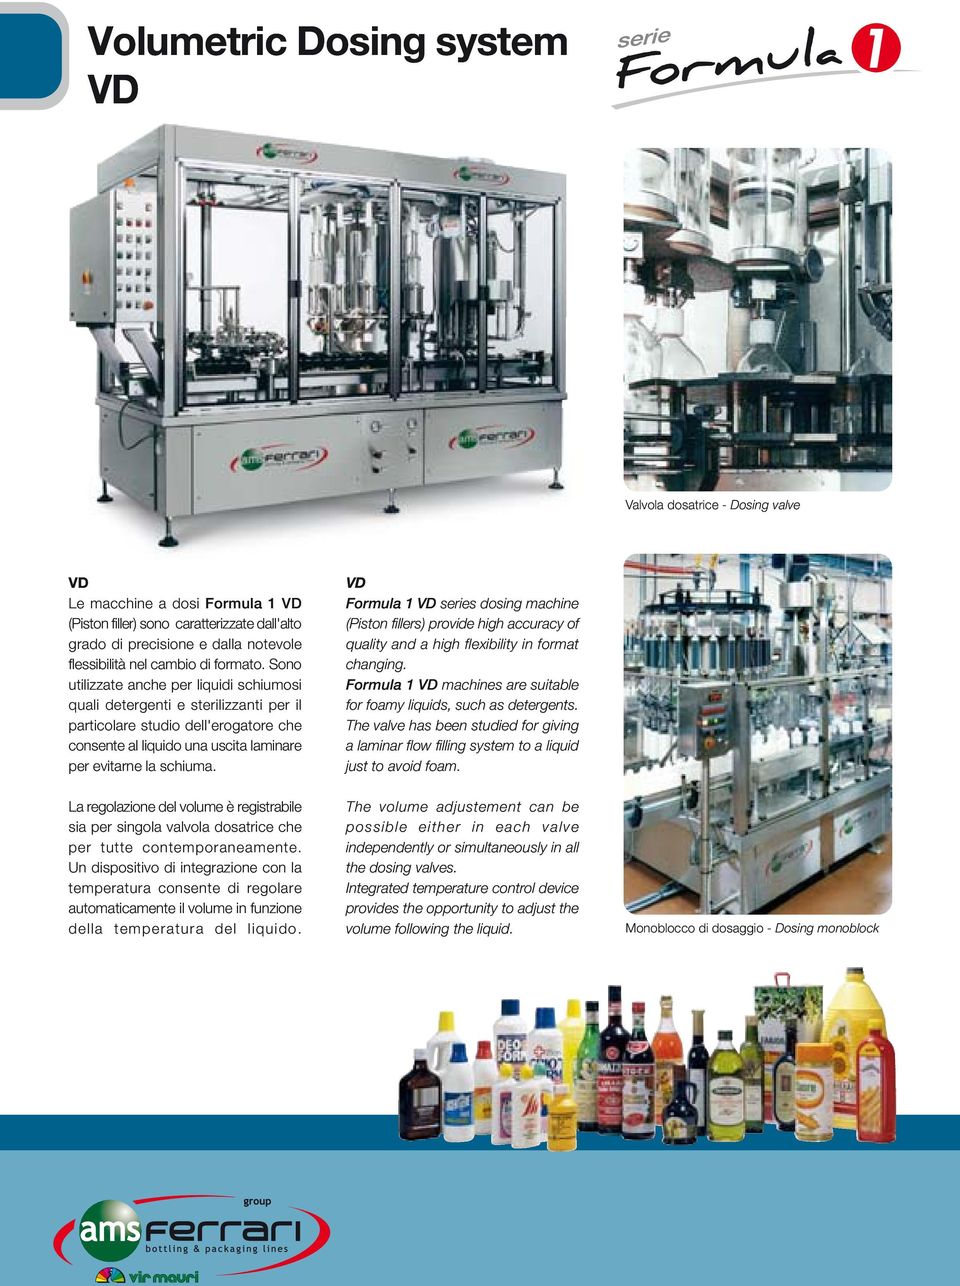 VD VD s dosing machine (Piston fillers) provide high accuracy of quality and a high flexibility in format changing. VD machines are suitable for foamy liquids, such as detergents.